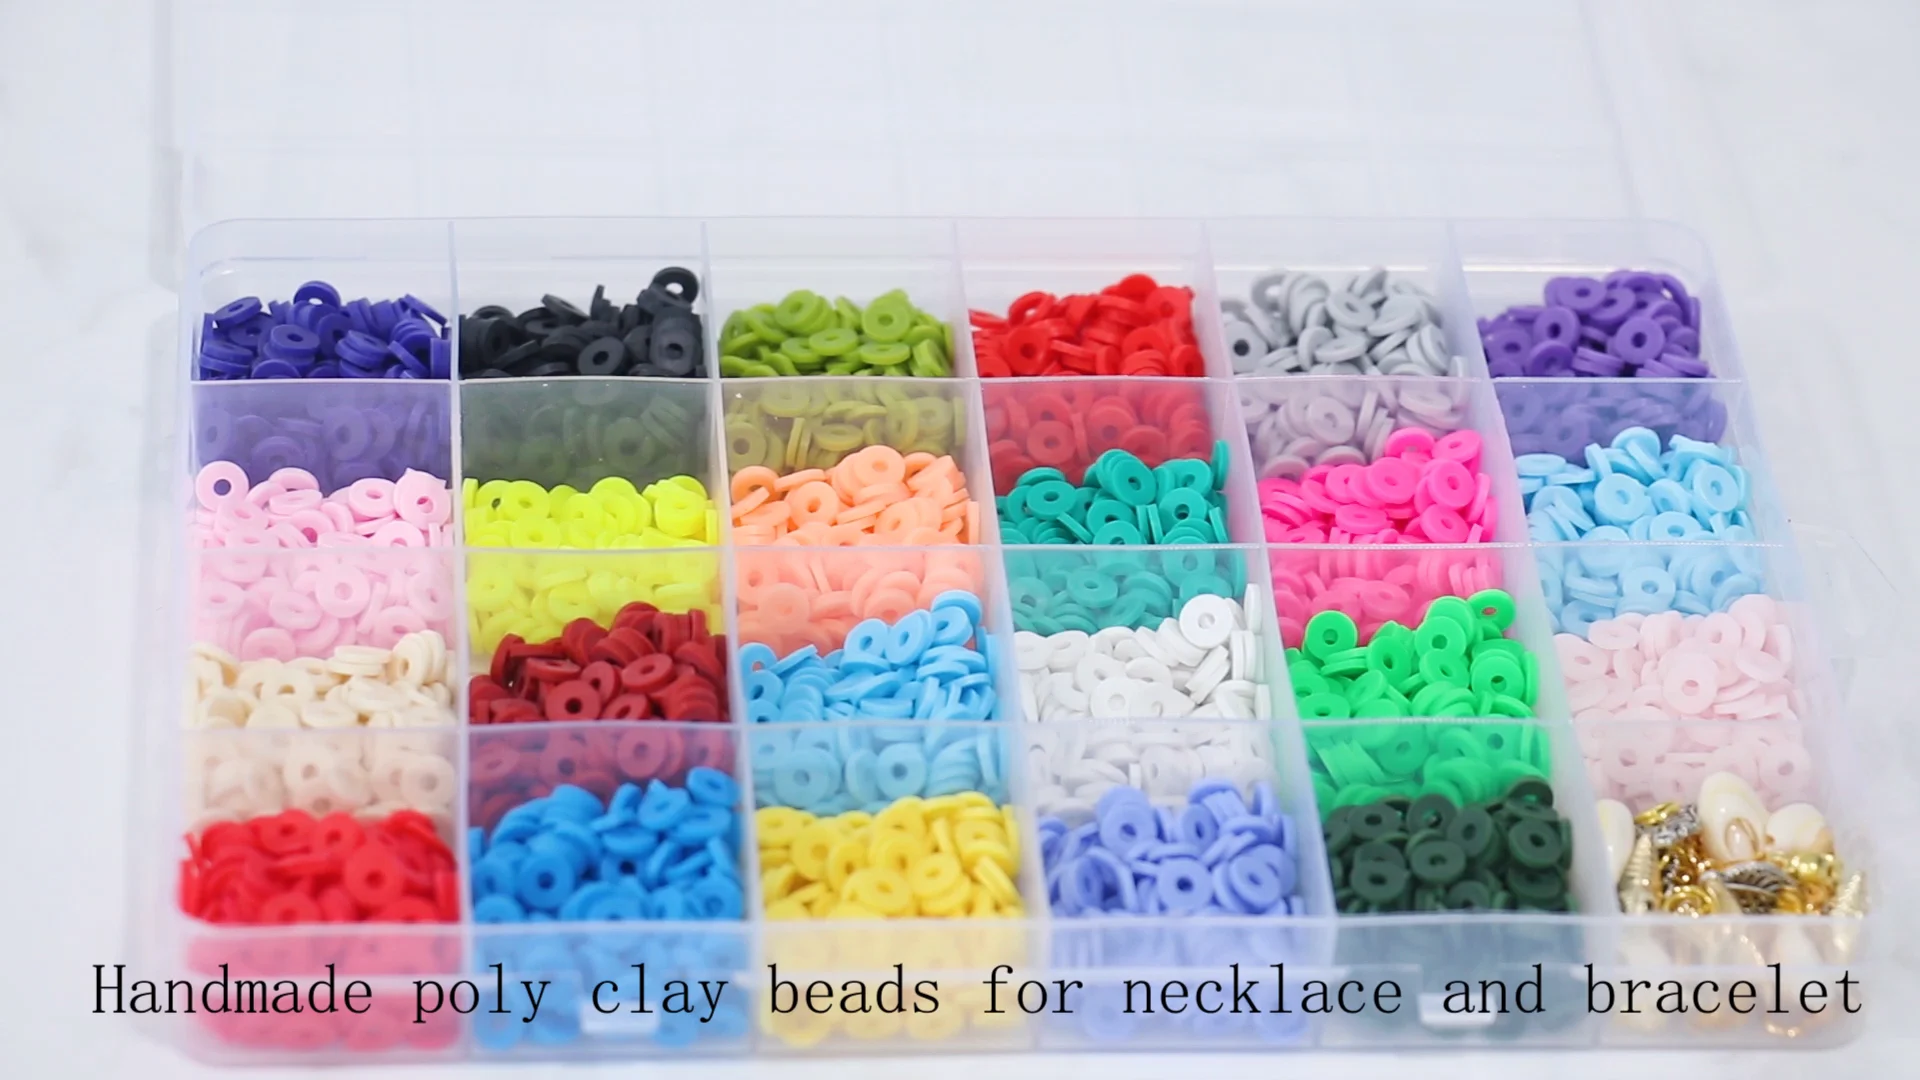 6000 Pcs Clay Heishi Beads for Bracelets, Flat Round Clay Spacer